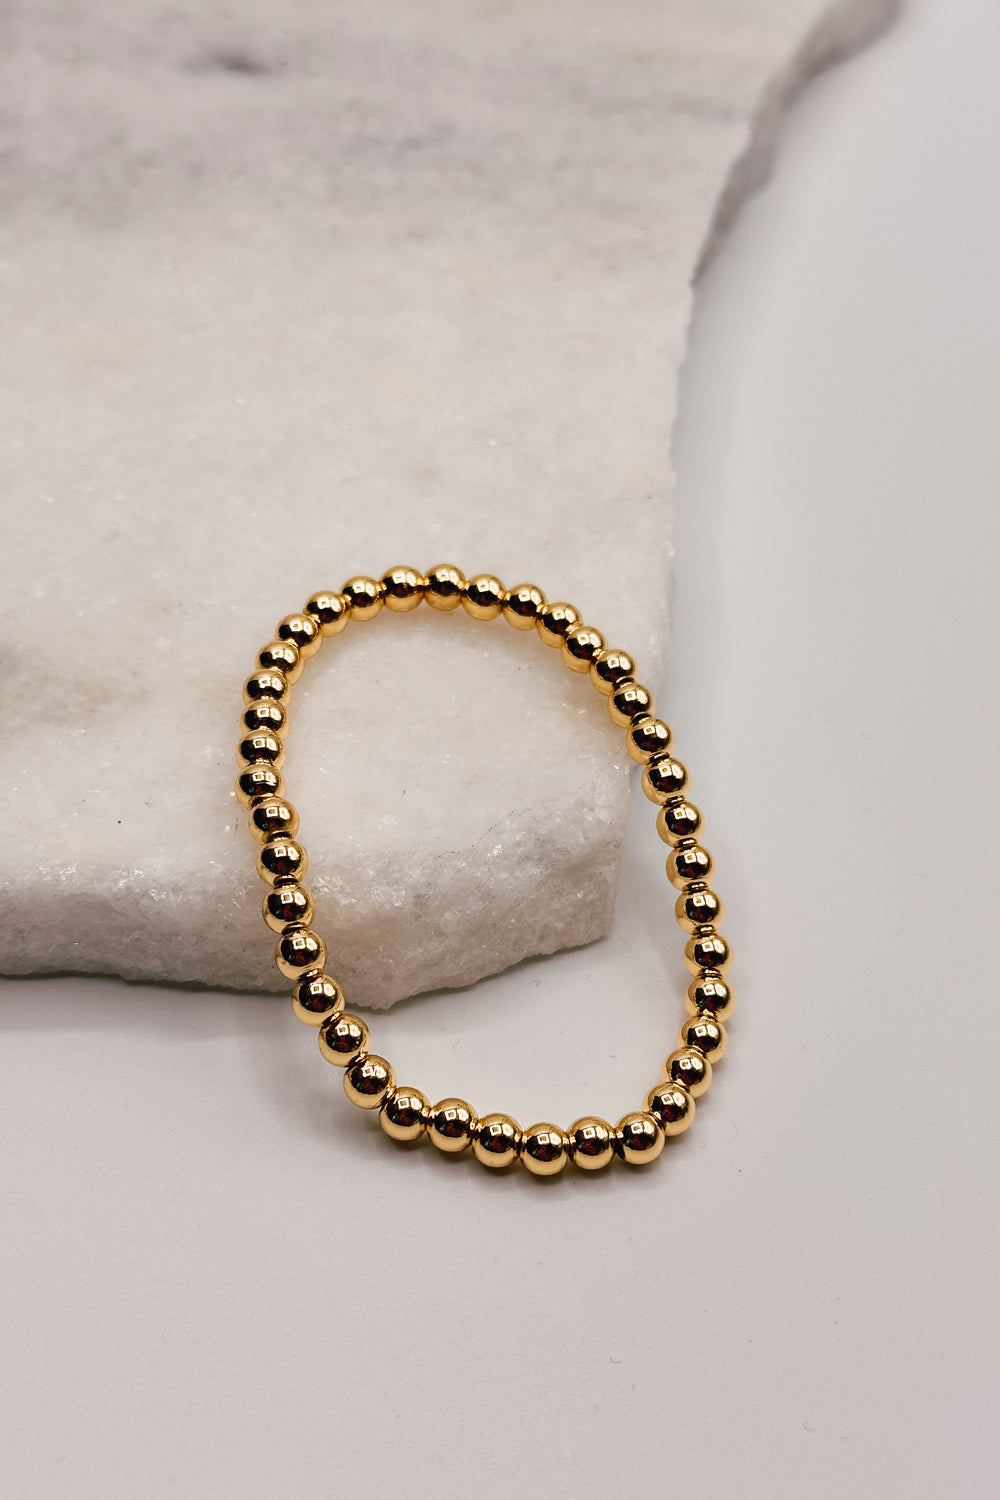 Image shows Clara Gold 6mm Beaded Water Resistant Bracelet against a white marble background.